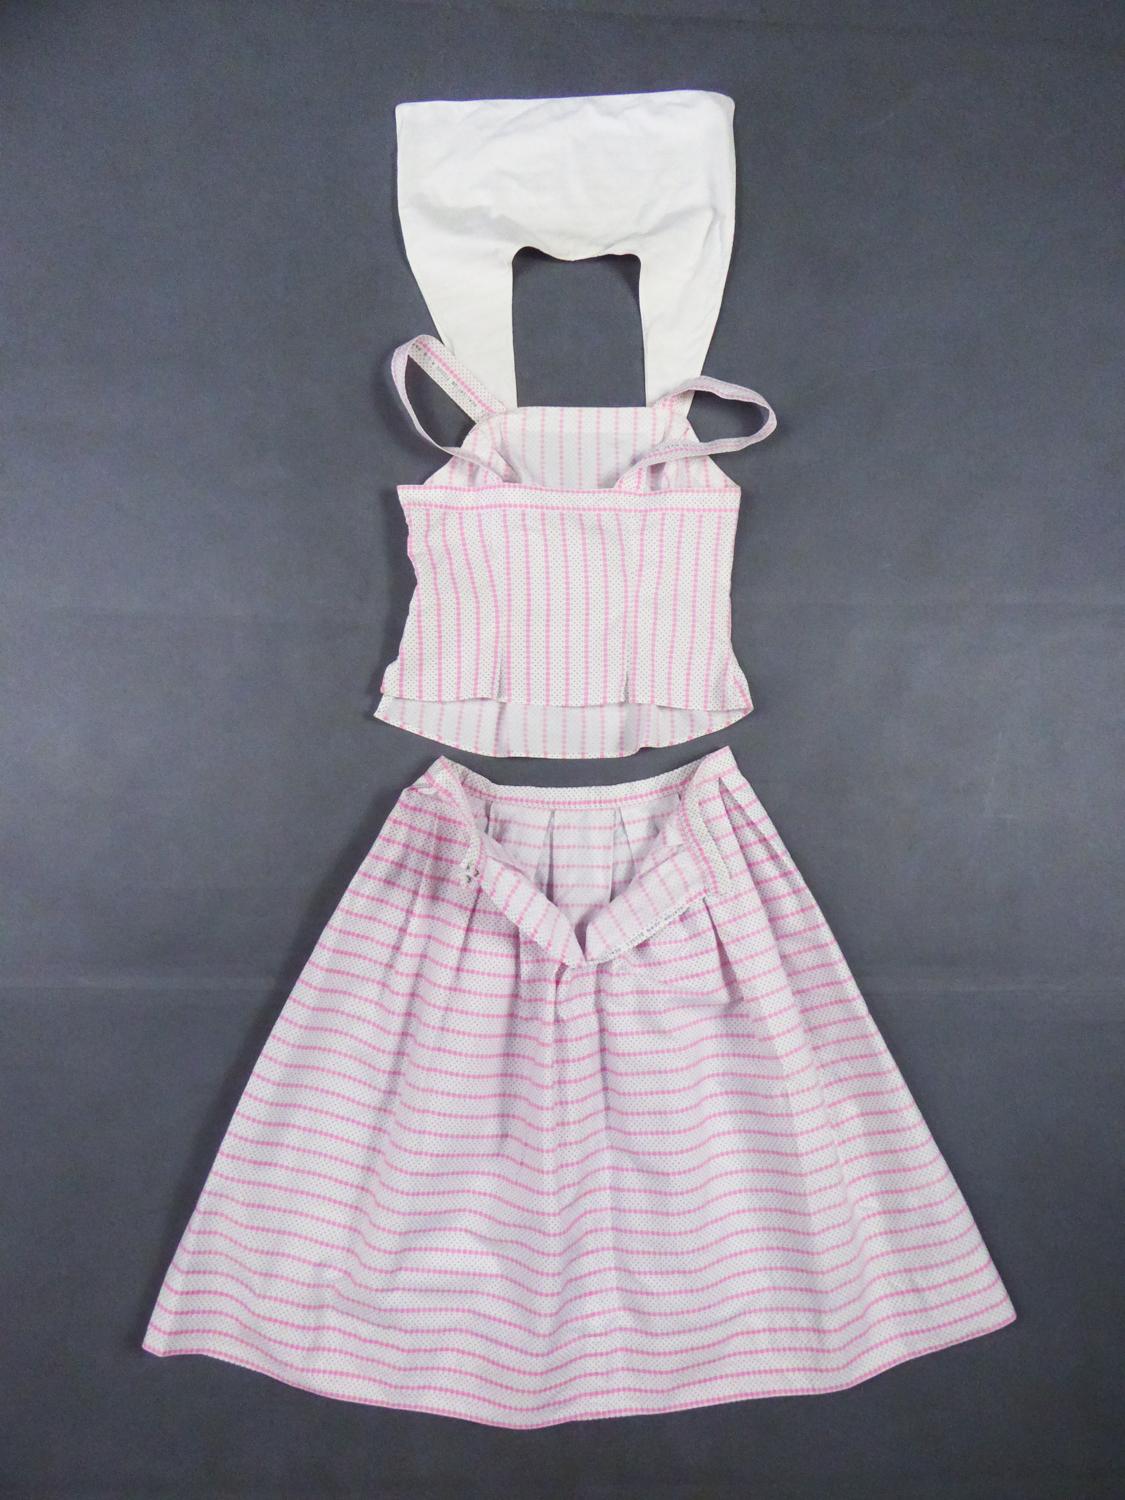 Circa 1960/1965
France

Summer skirt and top set in printed cotton by Jean Dessès dating from the early 1960s. In the spirit of Brigitte Bardot's gingham dresses, printed cotton with pink star stripes and small black polka dots on a white